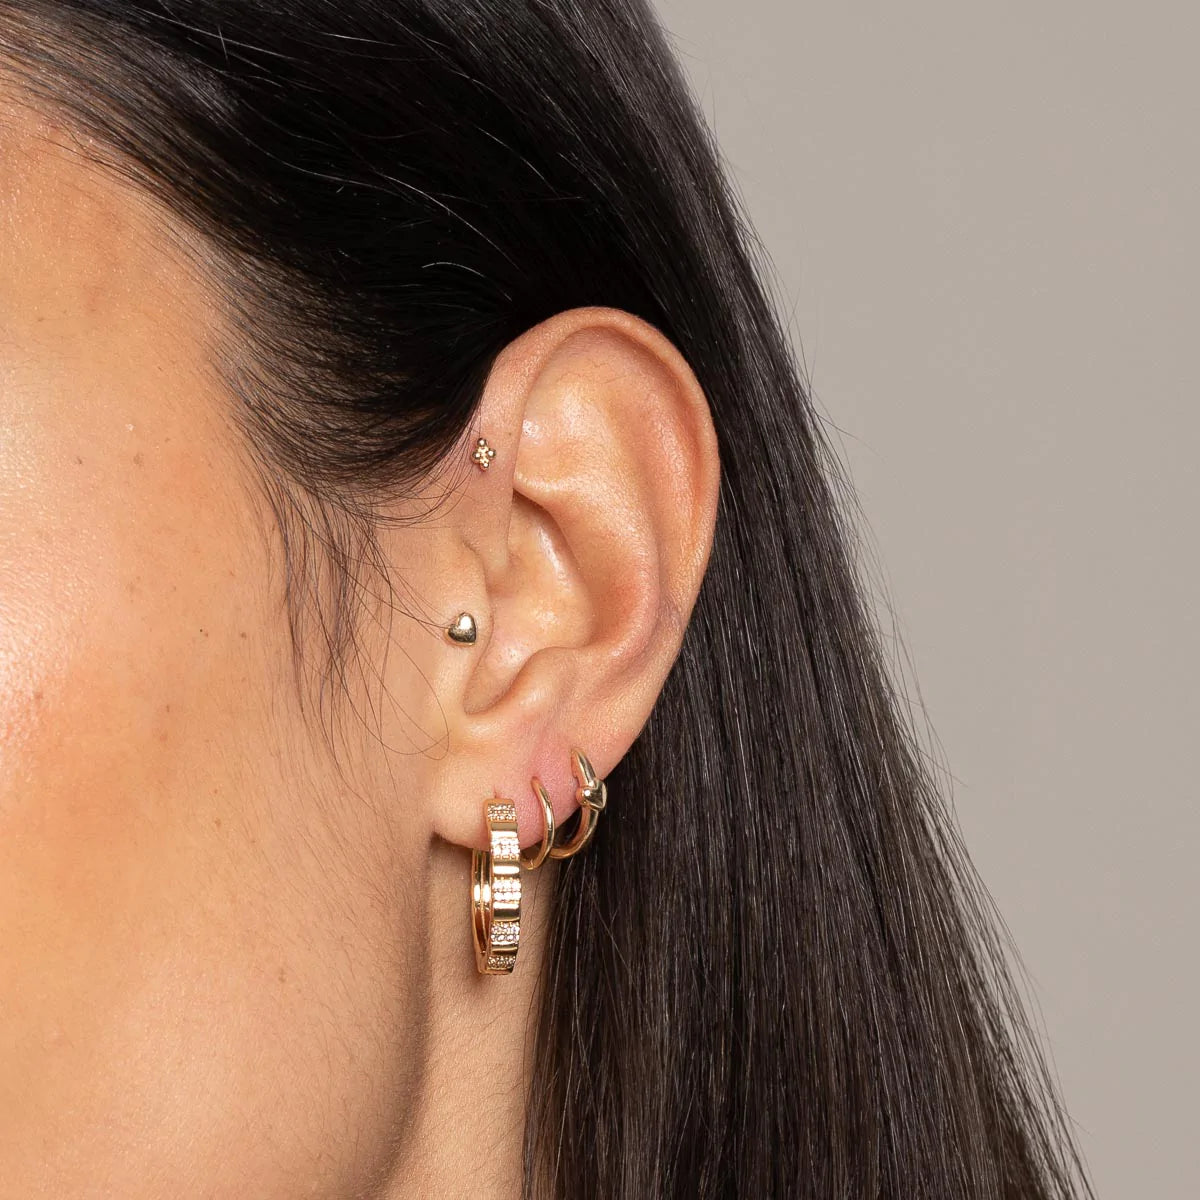 Pleated Crystal Hoops in Gold worn layered with earrings